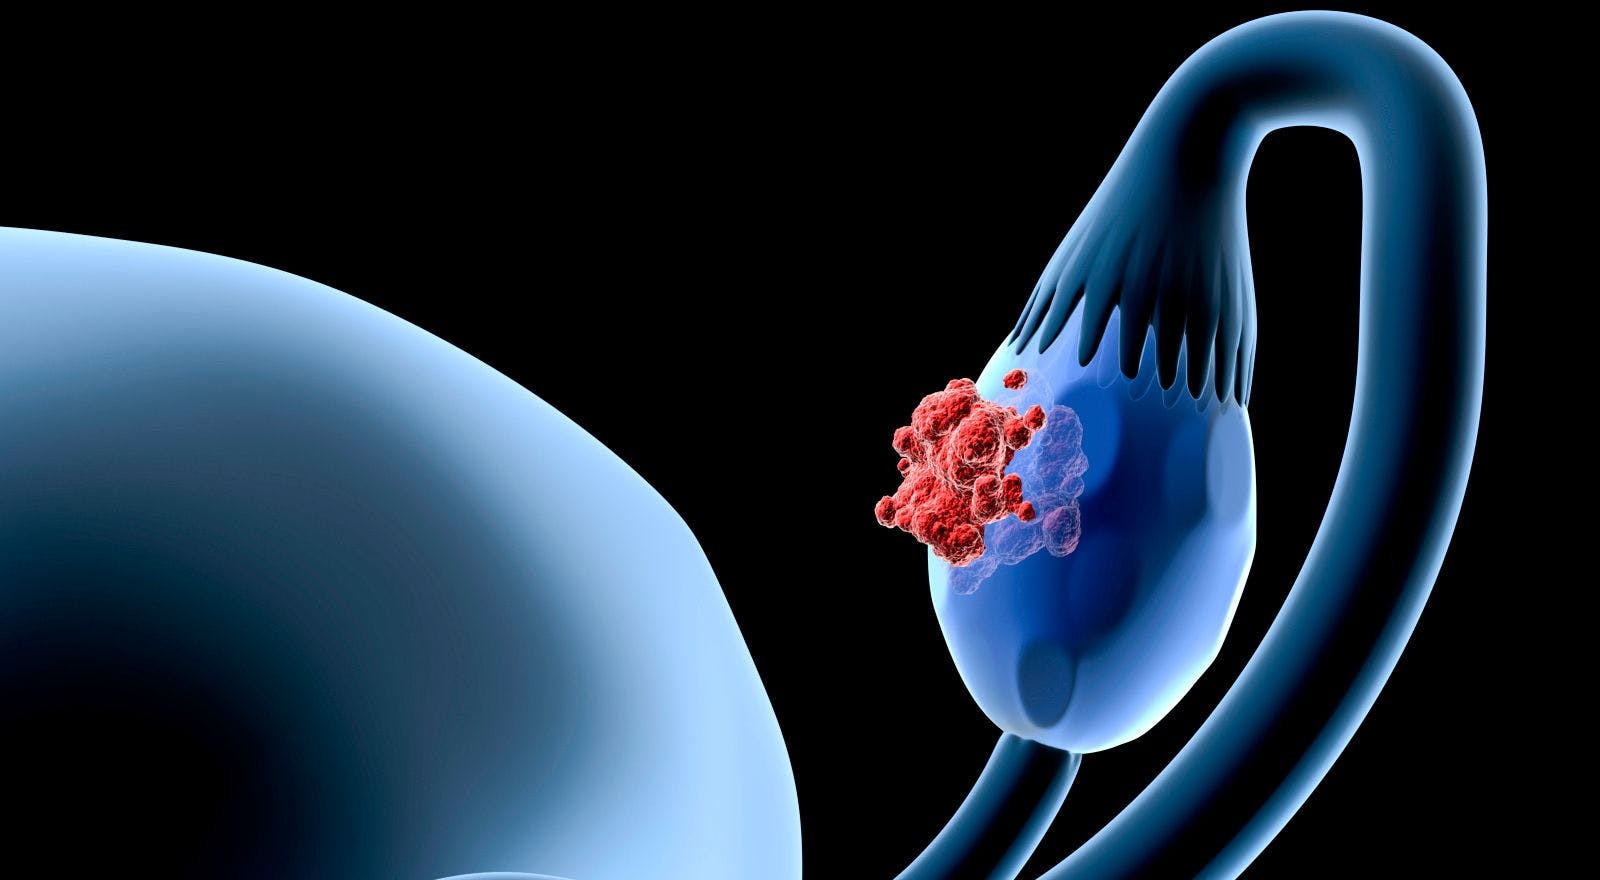 Tumor Treating Fields Plus Paclitaxel Appears Safe, Effective in Recurrent Ovarian Cancer